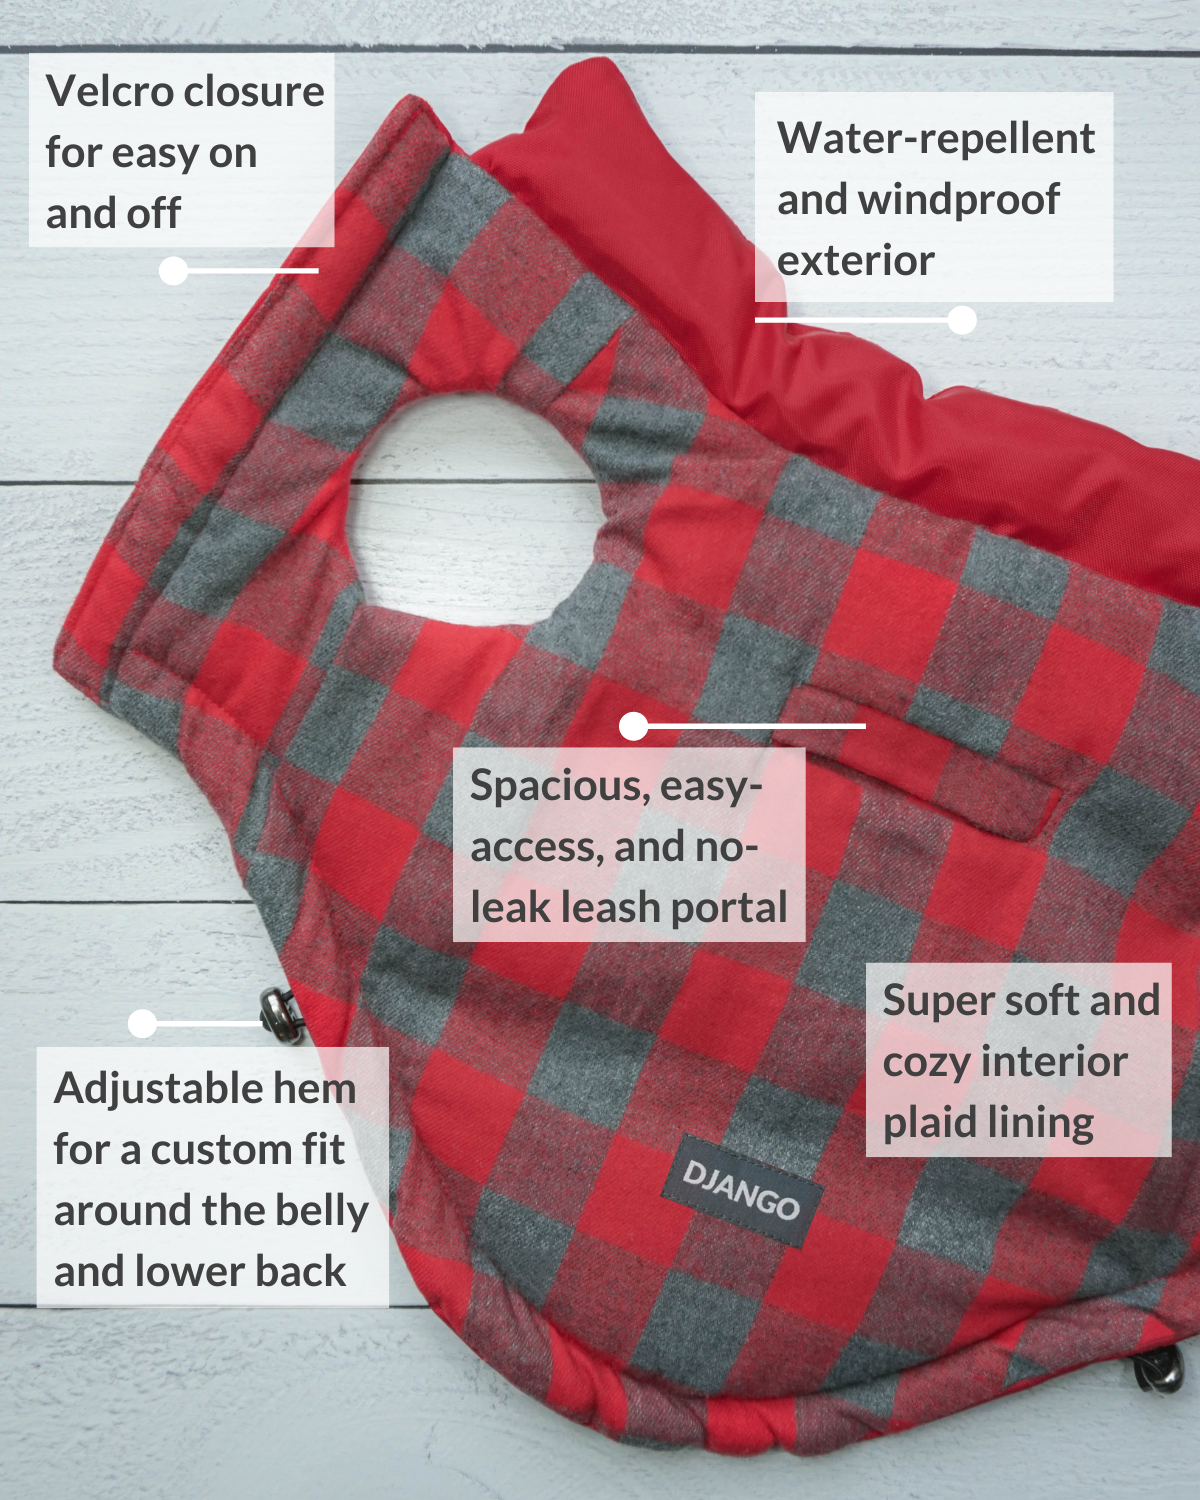 DJANGO’s popular puffer dog coat features two elastic drawstrings. Adjust your Reversible Puffer’s hem for a custom fit around your dog’s belly and lower back. Our insulated dog coat also now features an oversized, no-leak, and easy-access leash portal that pairs perfectly with your favorite DJANGO dog harness and leash set. - djangobrand.com